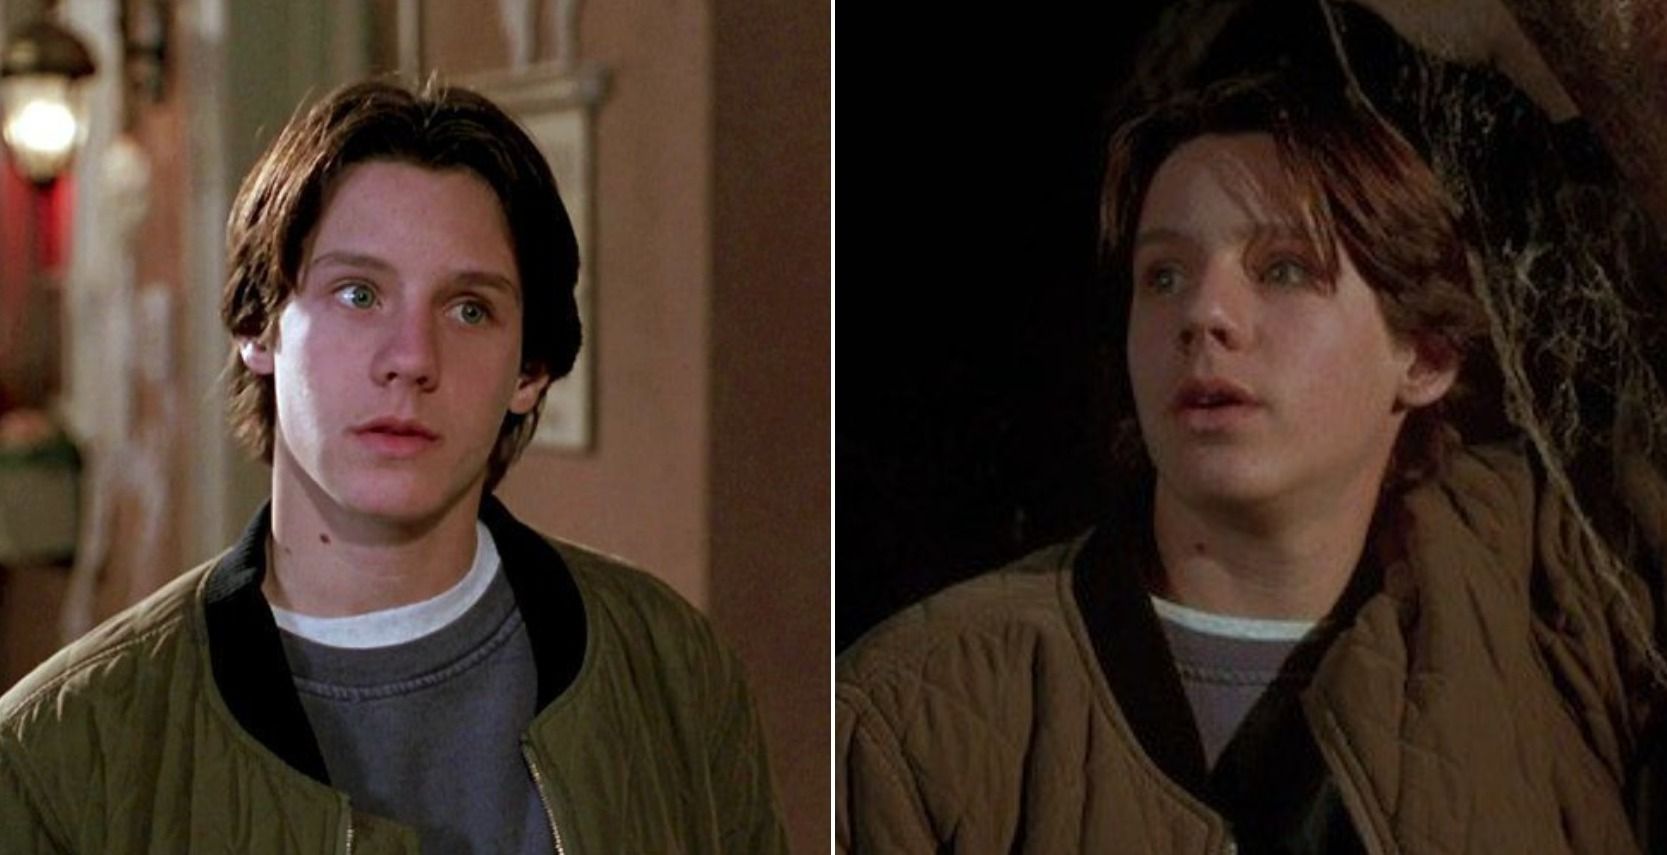 Hocus Pocus: 5 Times We Felt Bad For Max (& 5 Times We Hated Him)